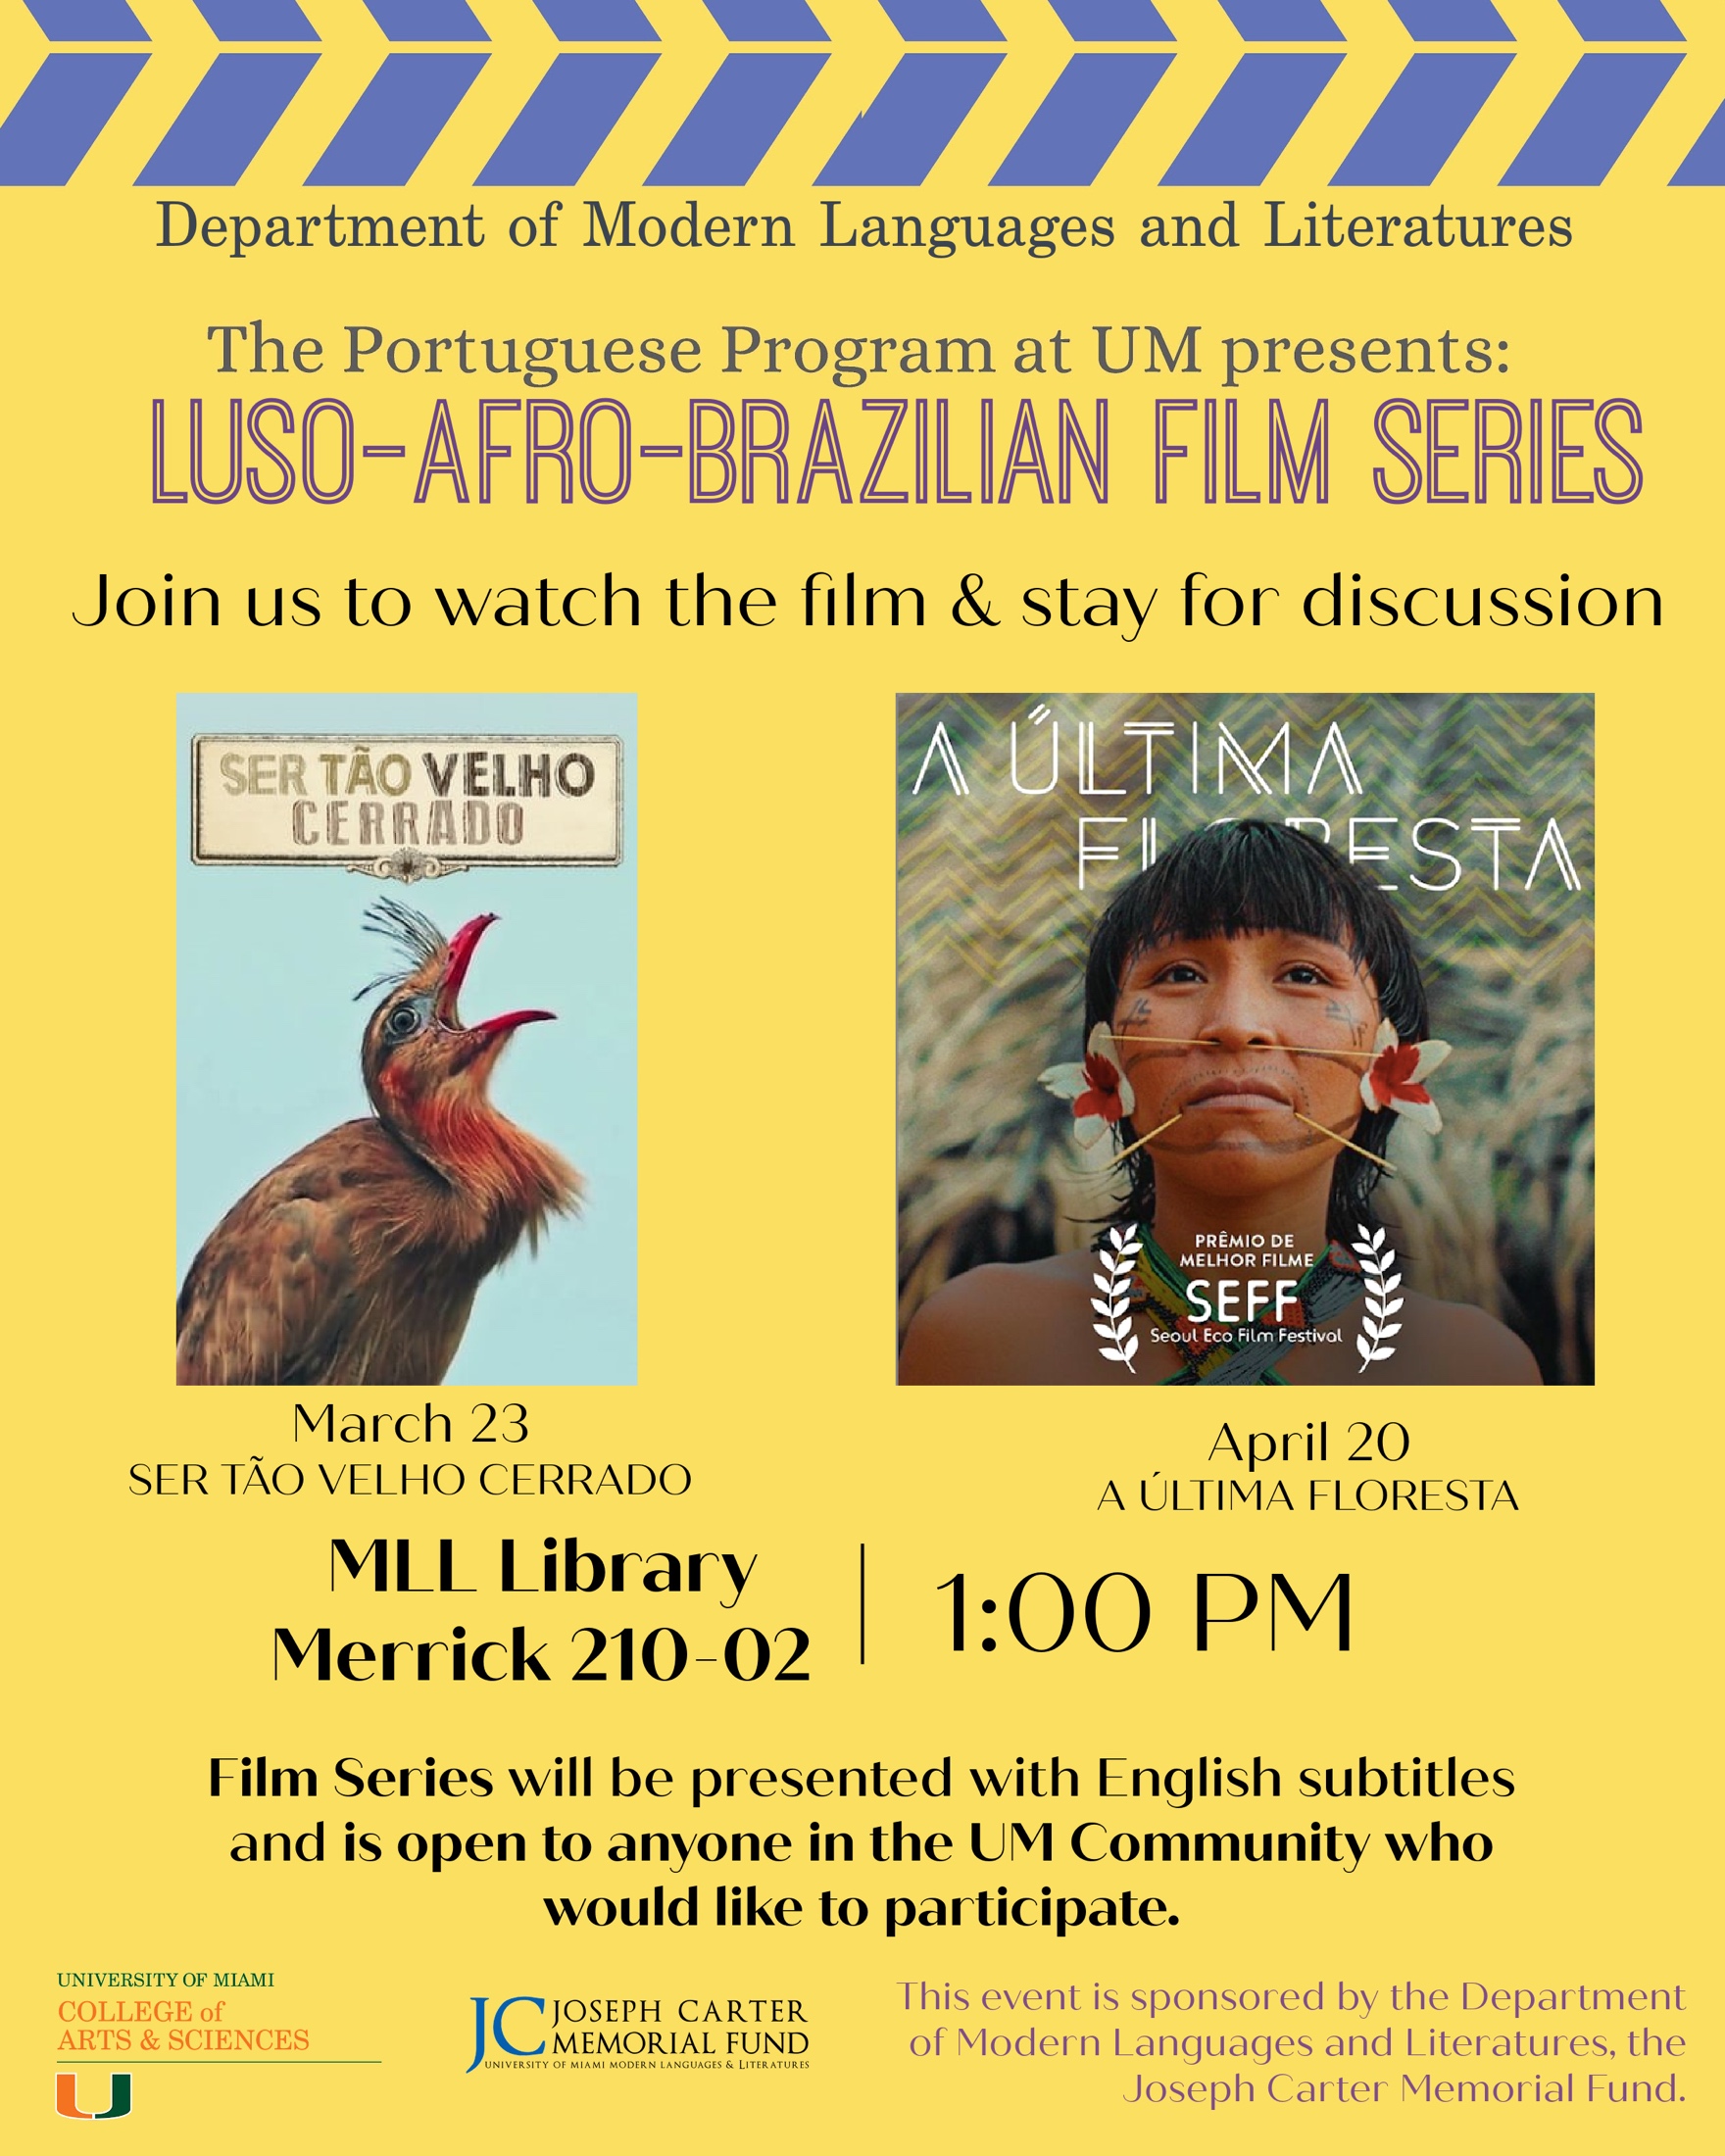 This is an event flyer. The flyer contains a picture of the film posters for both films that will be shown in the series. The first film poster contains text in Portuguese and an exotic bird. The second film poster contains text in Portugues and an up close image of an indigenous person. The flyer contains details about the event. The majority of the flyer contains text, and yellow coloring.